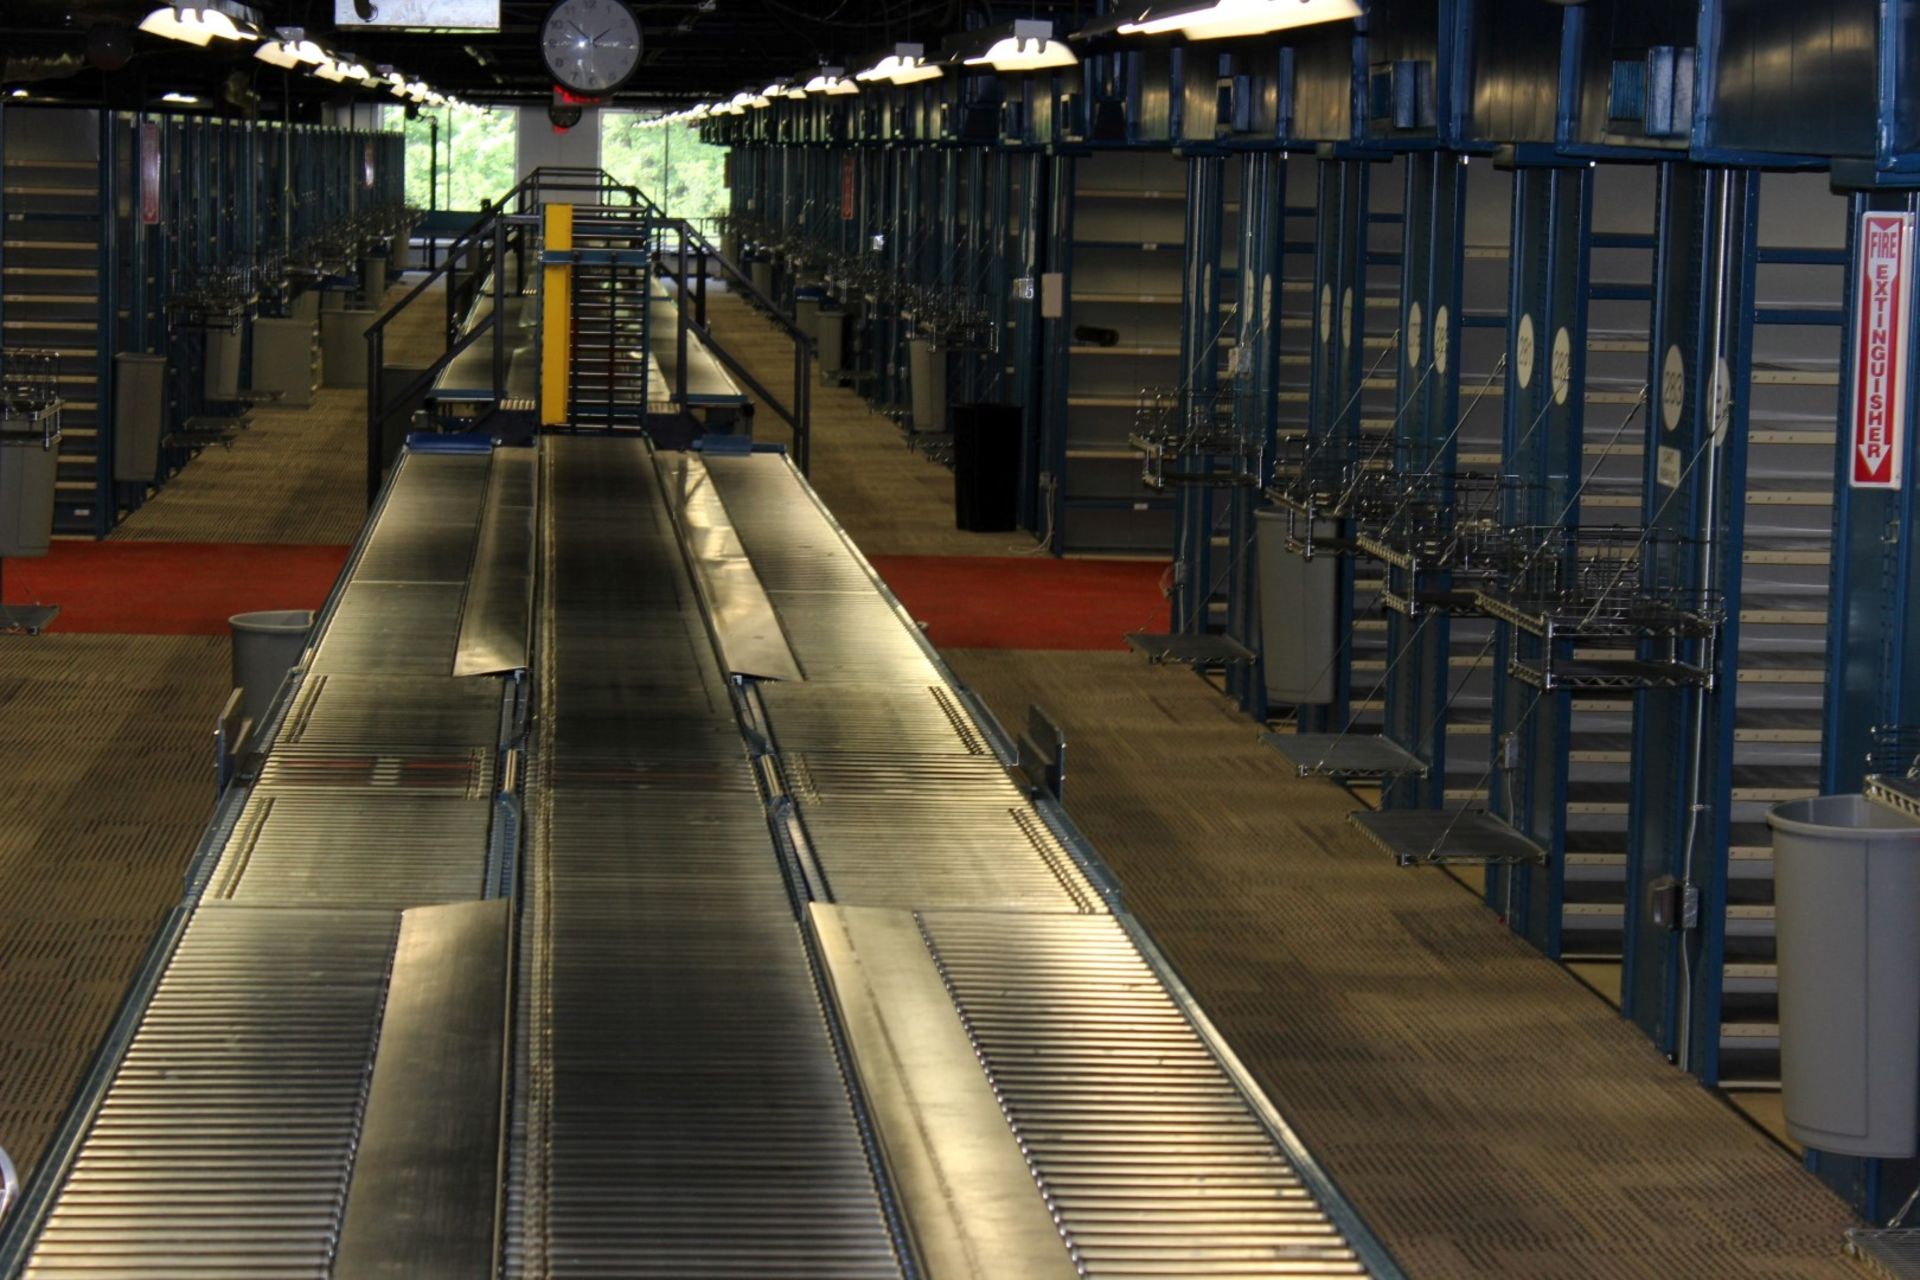 30 FT LONG 24"W RAPISTAN POWERED CONVEYOR WITH 18"W GRAVITY CONVEYOR LINES BOTH SIDES - Image 4 of 4